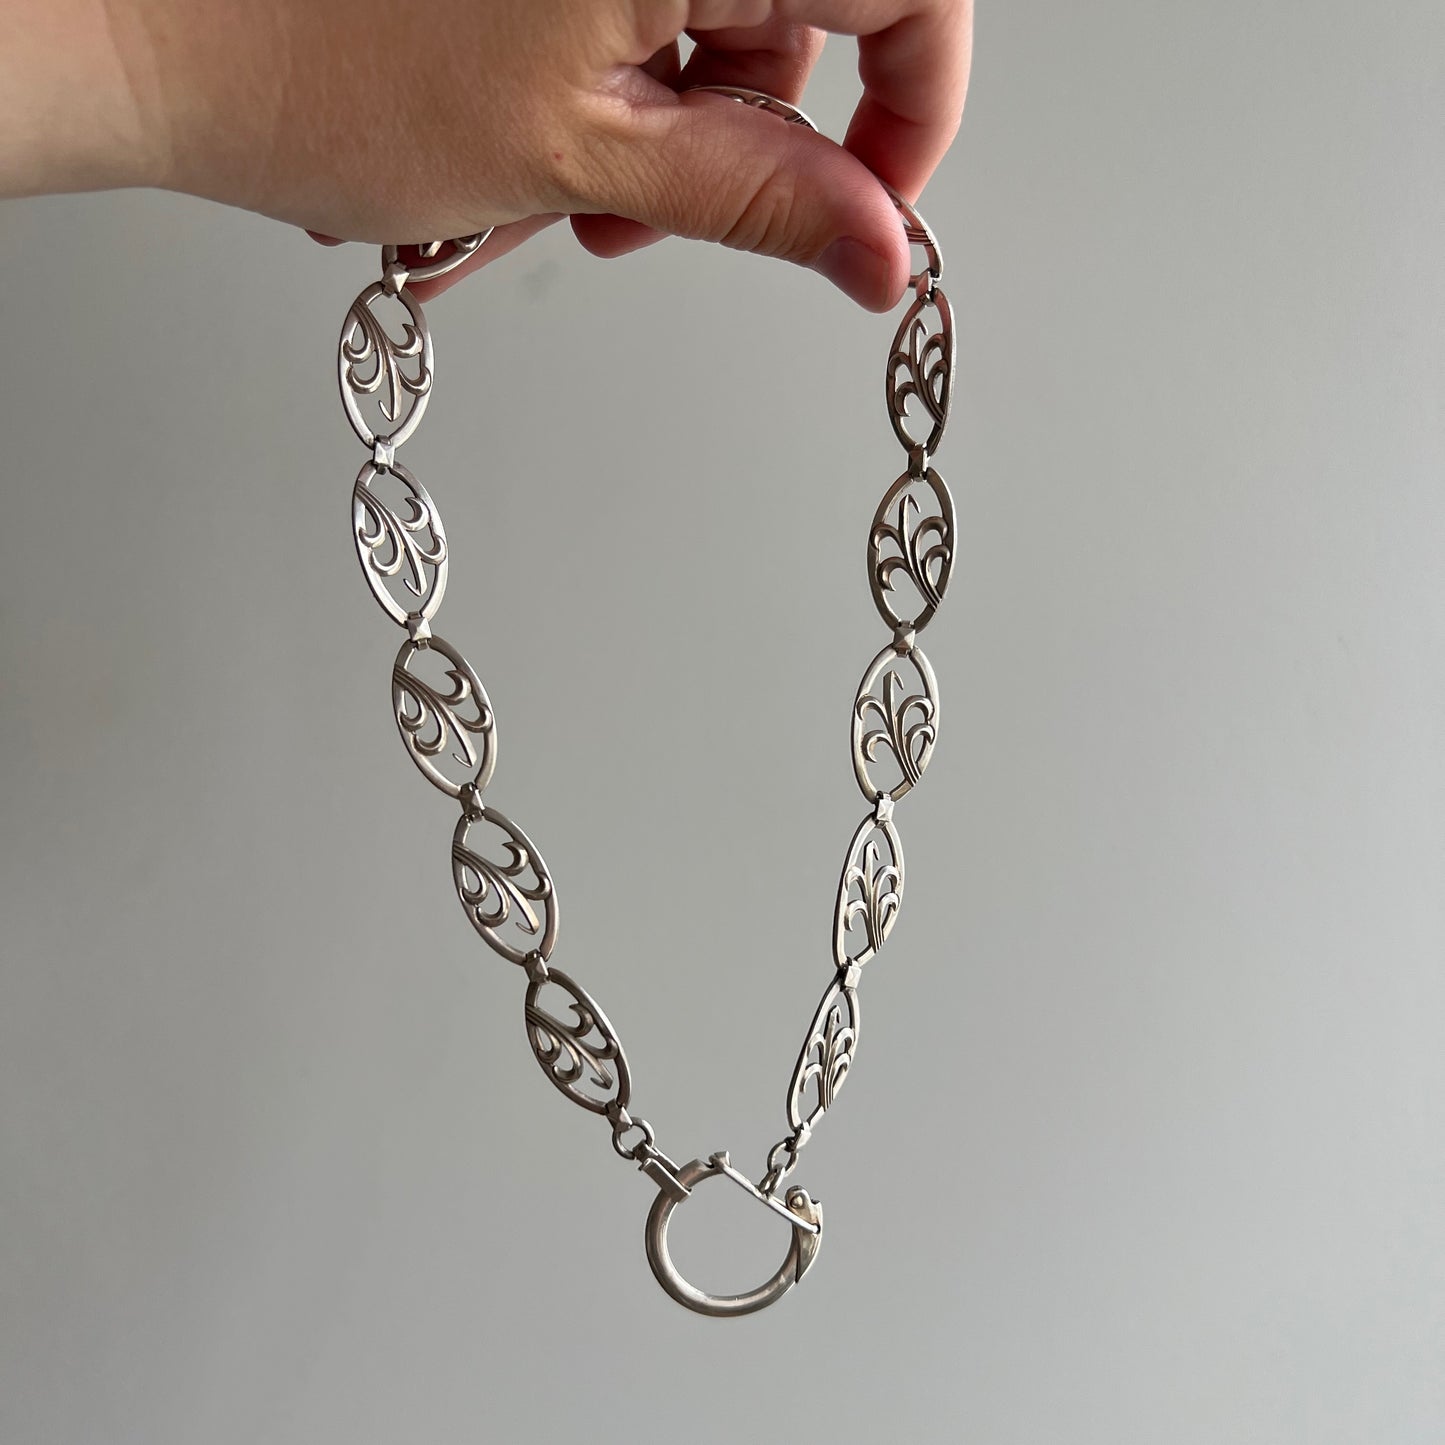 reimagined V I N T A G E // leafy links / sterling silver fancy link necklace with charm holder clasp / 15"